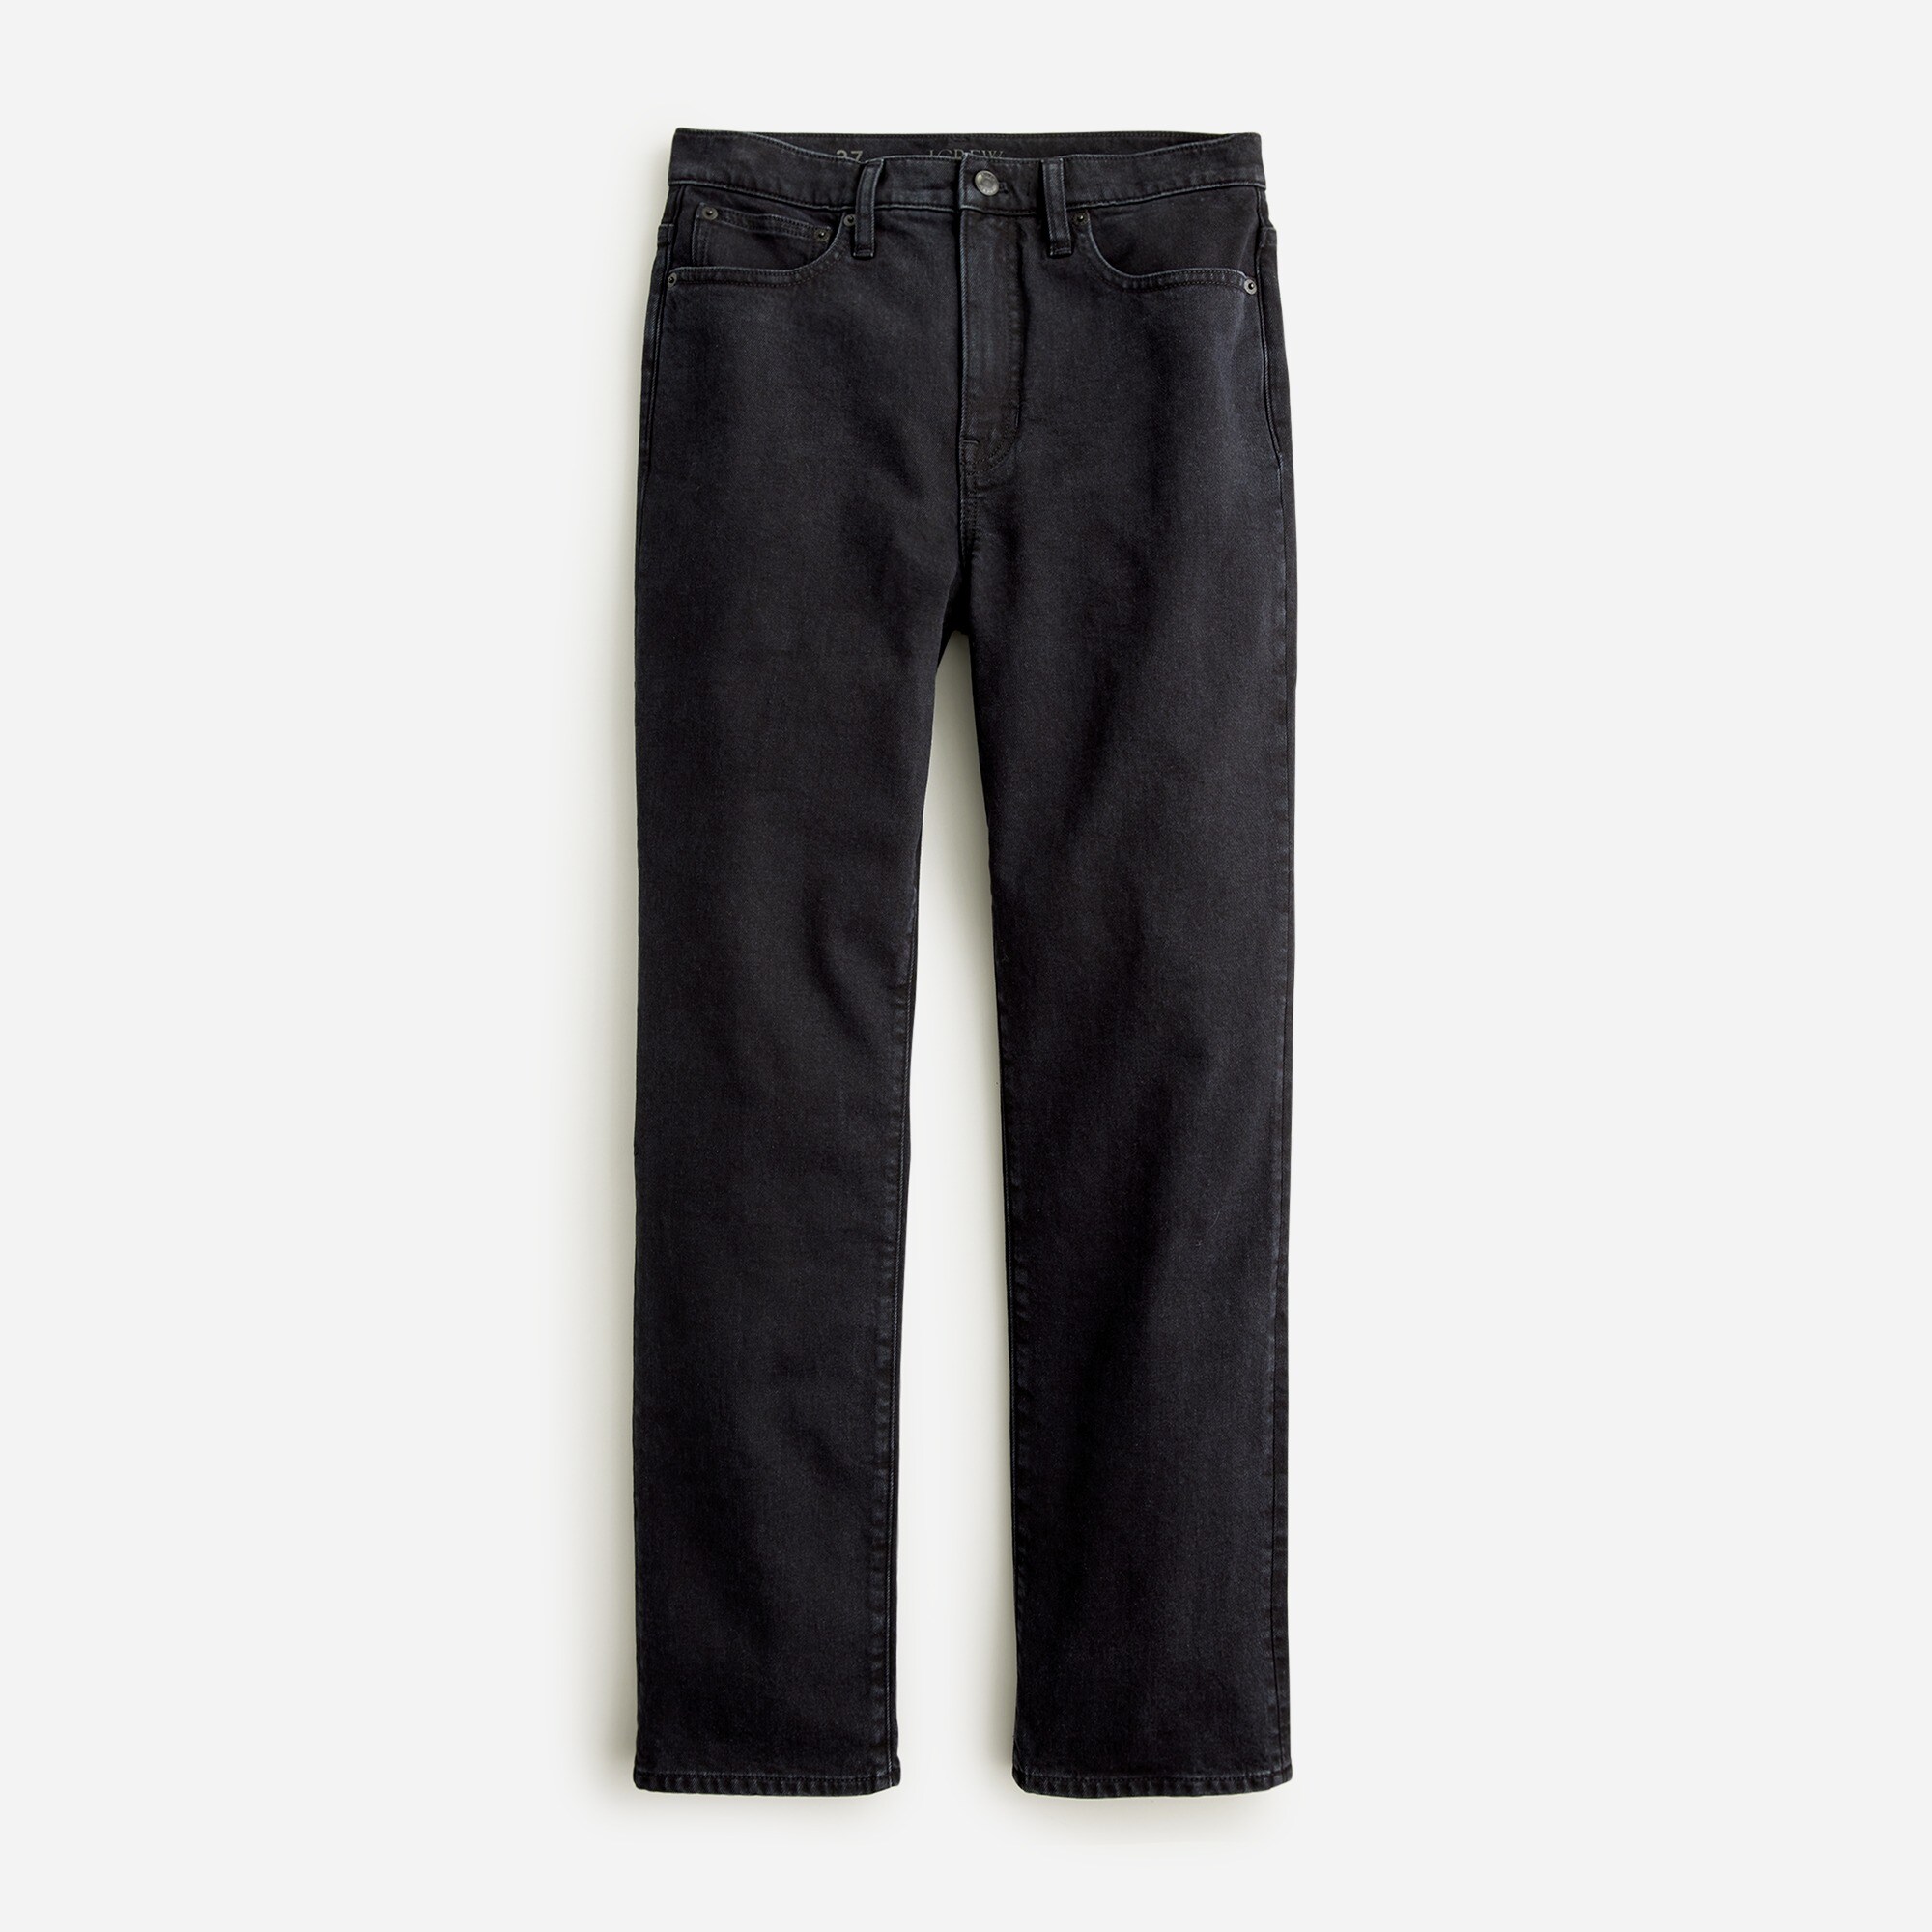  Classic straight jean in washed black